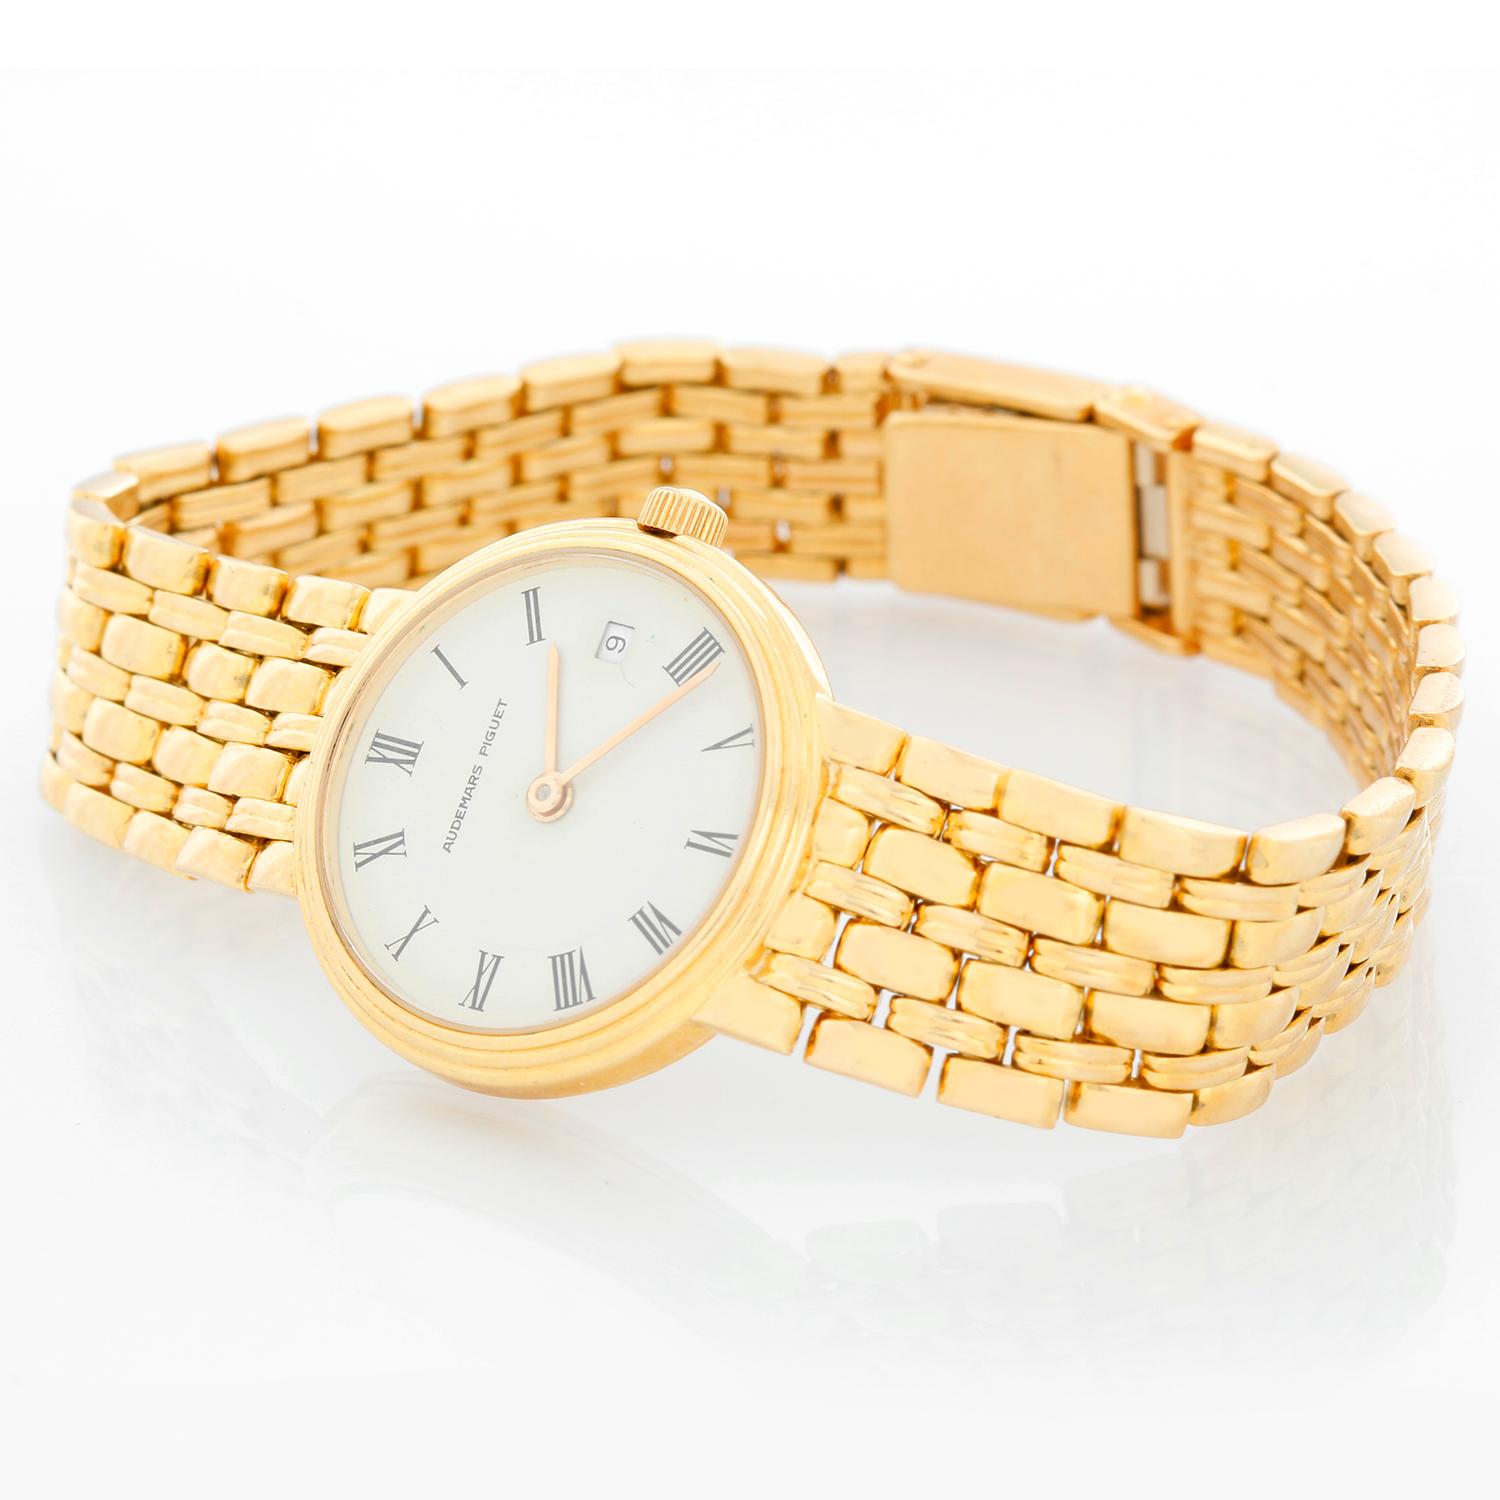 Vintage Audemars Piguet 18K Yellow Gold Ladies Watch - Quartz. 18K yellow gold case with smooth bezel ( 24 mm). Ivory dial with Roman numerals. 18k yellow  gold link bracelet; will fit up to a 6 3/4 inch wrist. Pre-owned with custom box.